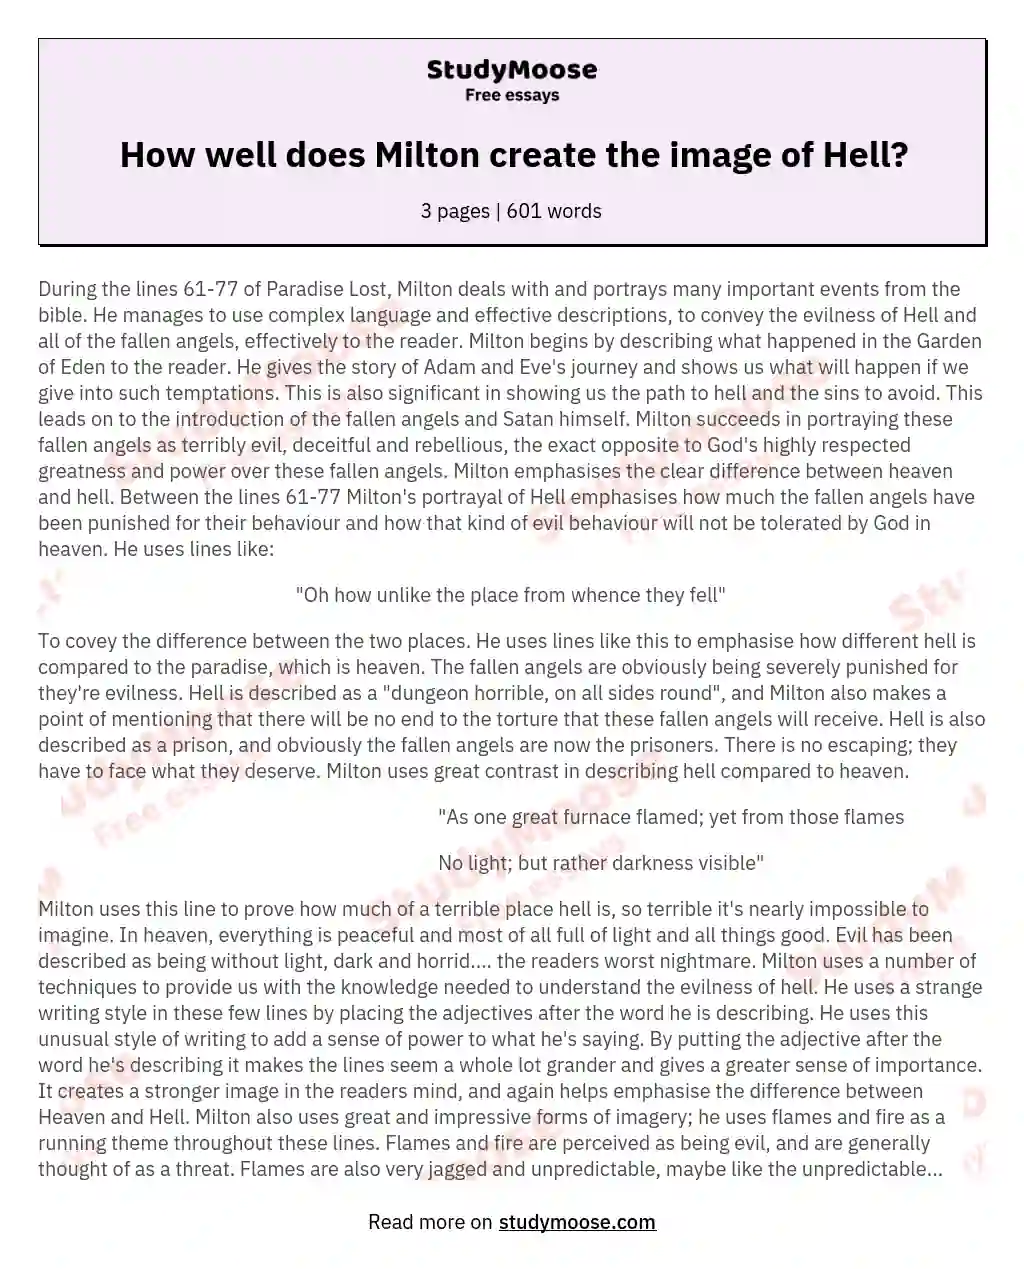 How well does Milton create the image of Hell? essay